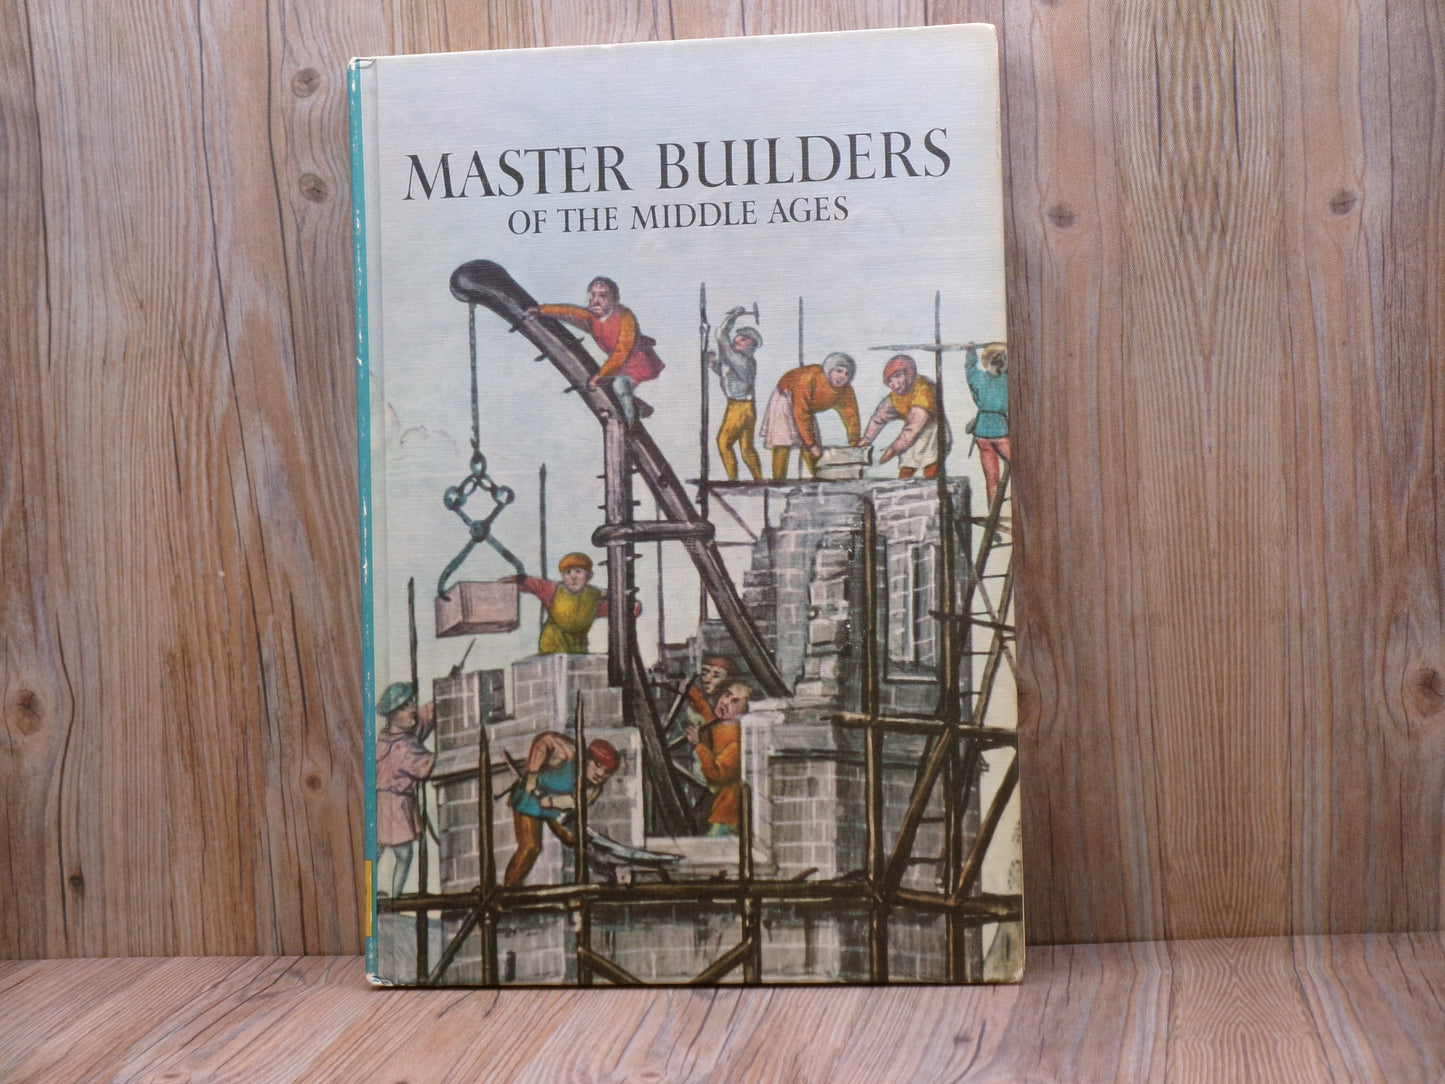 Master Builders of the Middle Ages by David Jacobs